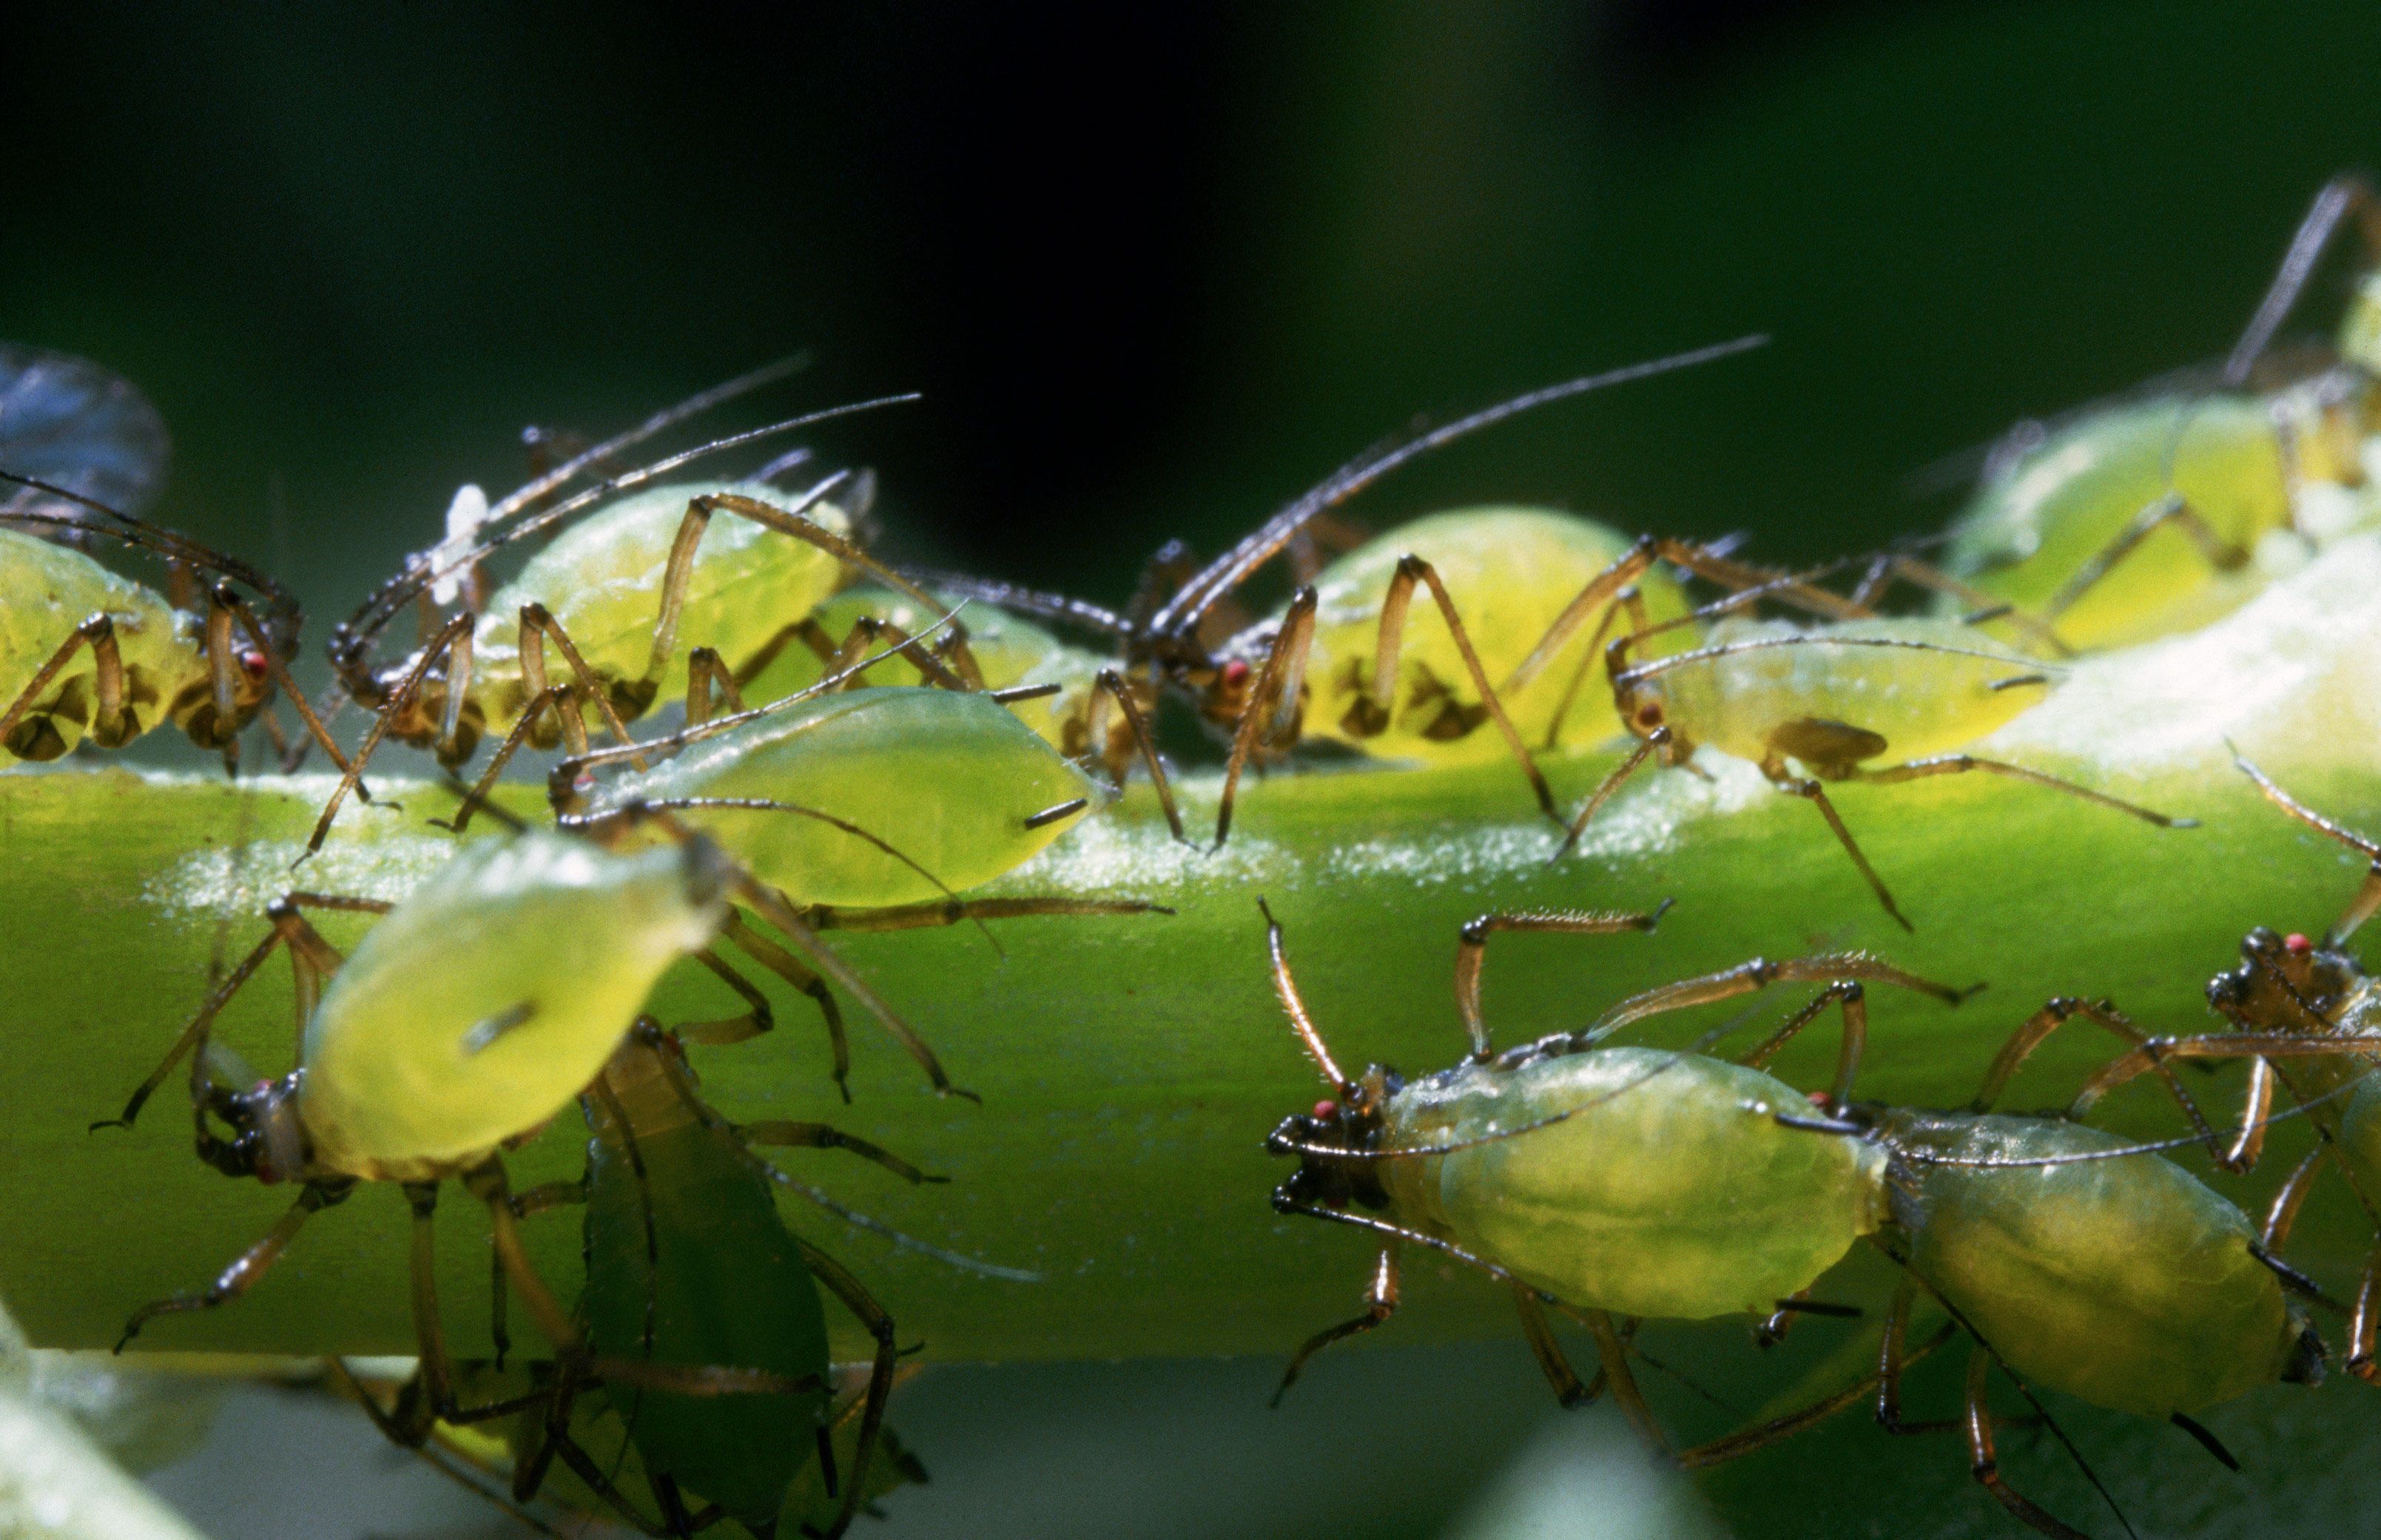 Swarms of bugs in New York are aphids. pic